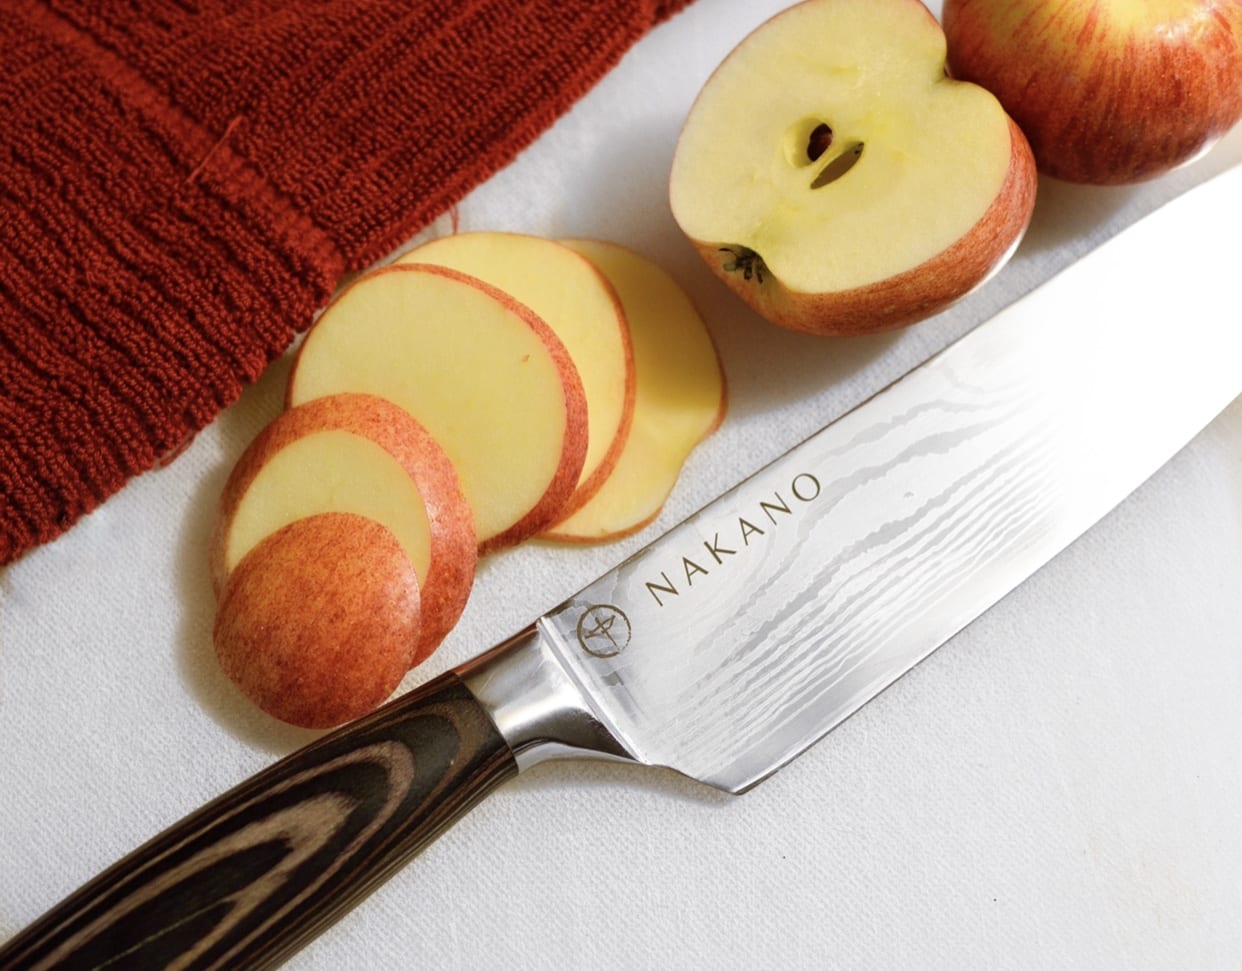 The Paudin Pro Chef's Knife Is a Top-Rated Kitchen Knife on